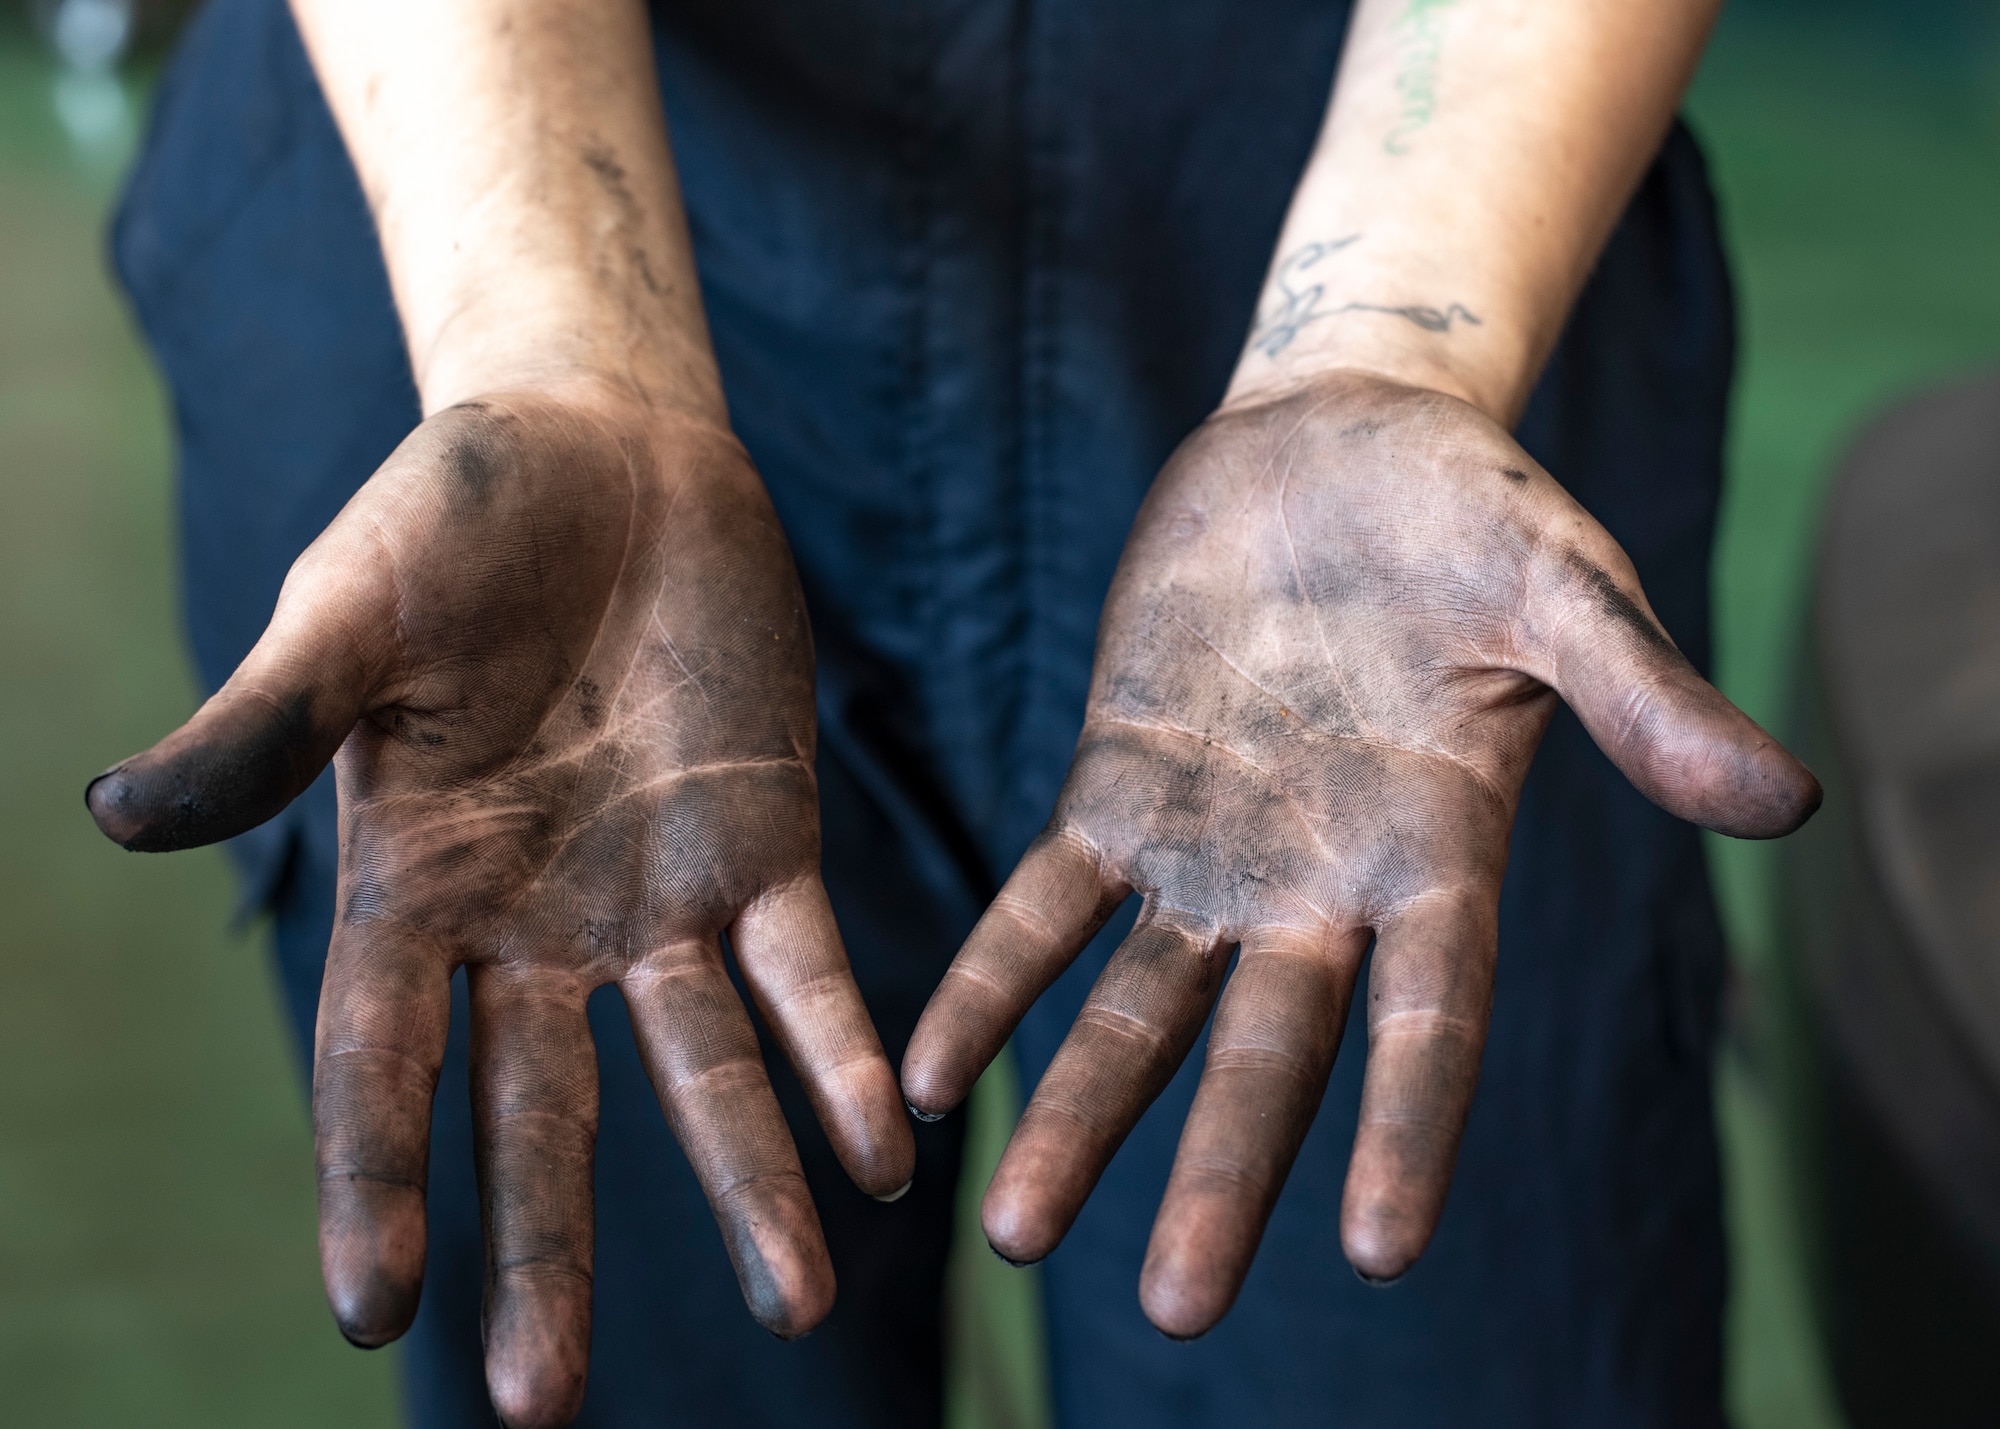 Airman 1st Class Maddison Stockman, 374th Logistics Readiness Squadron Vehicle Maintenance Flight apprentice, reveals her oil-covered hands after repairing a government vehicle at Yokota Air Base, Japan, Aug. 17, 2022.